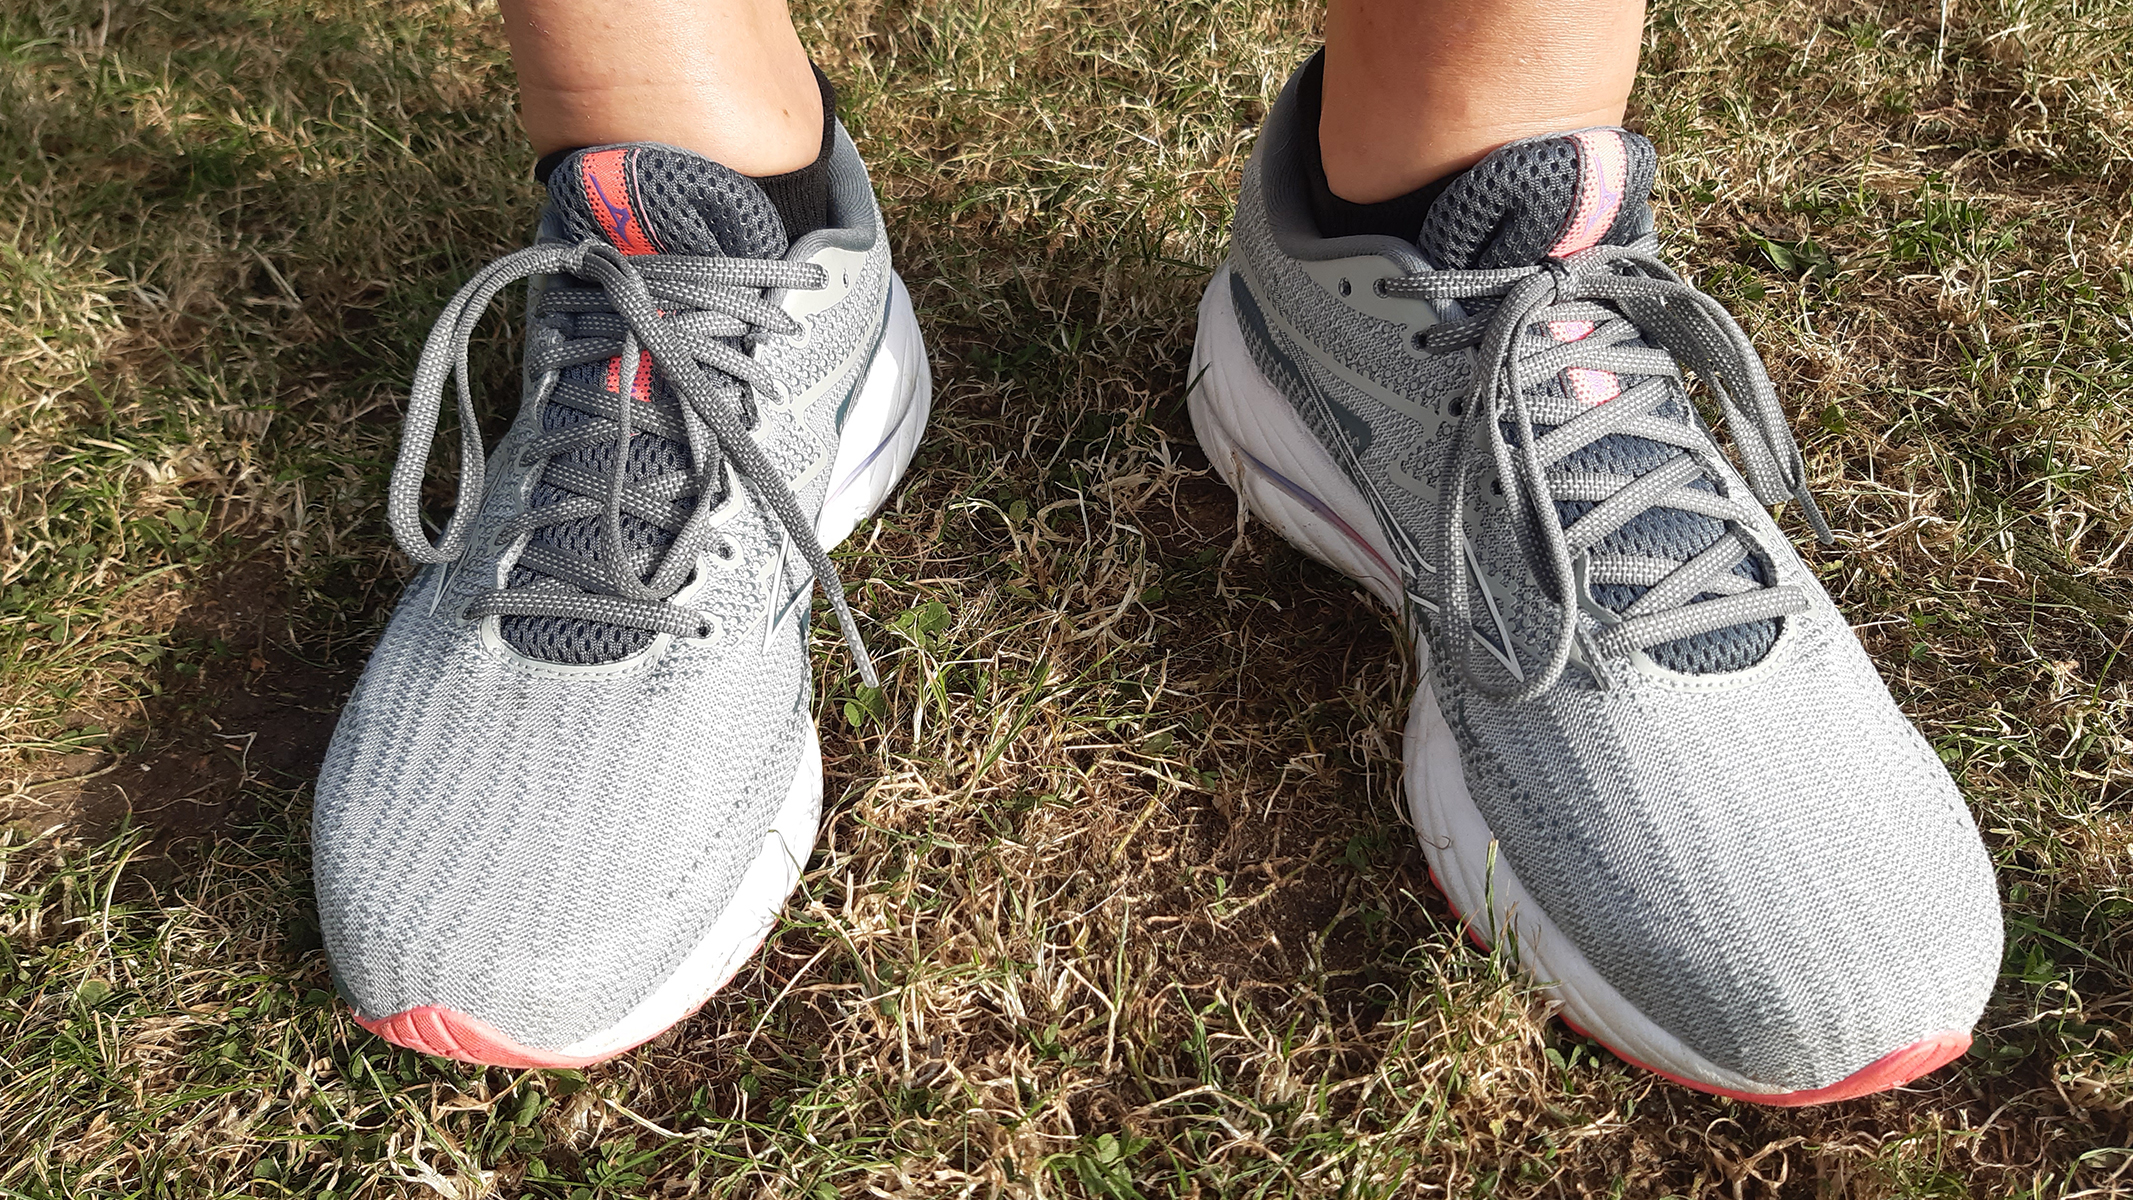 Mizuno Wave Rider 27 running shoe review | Live Science